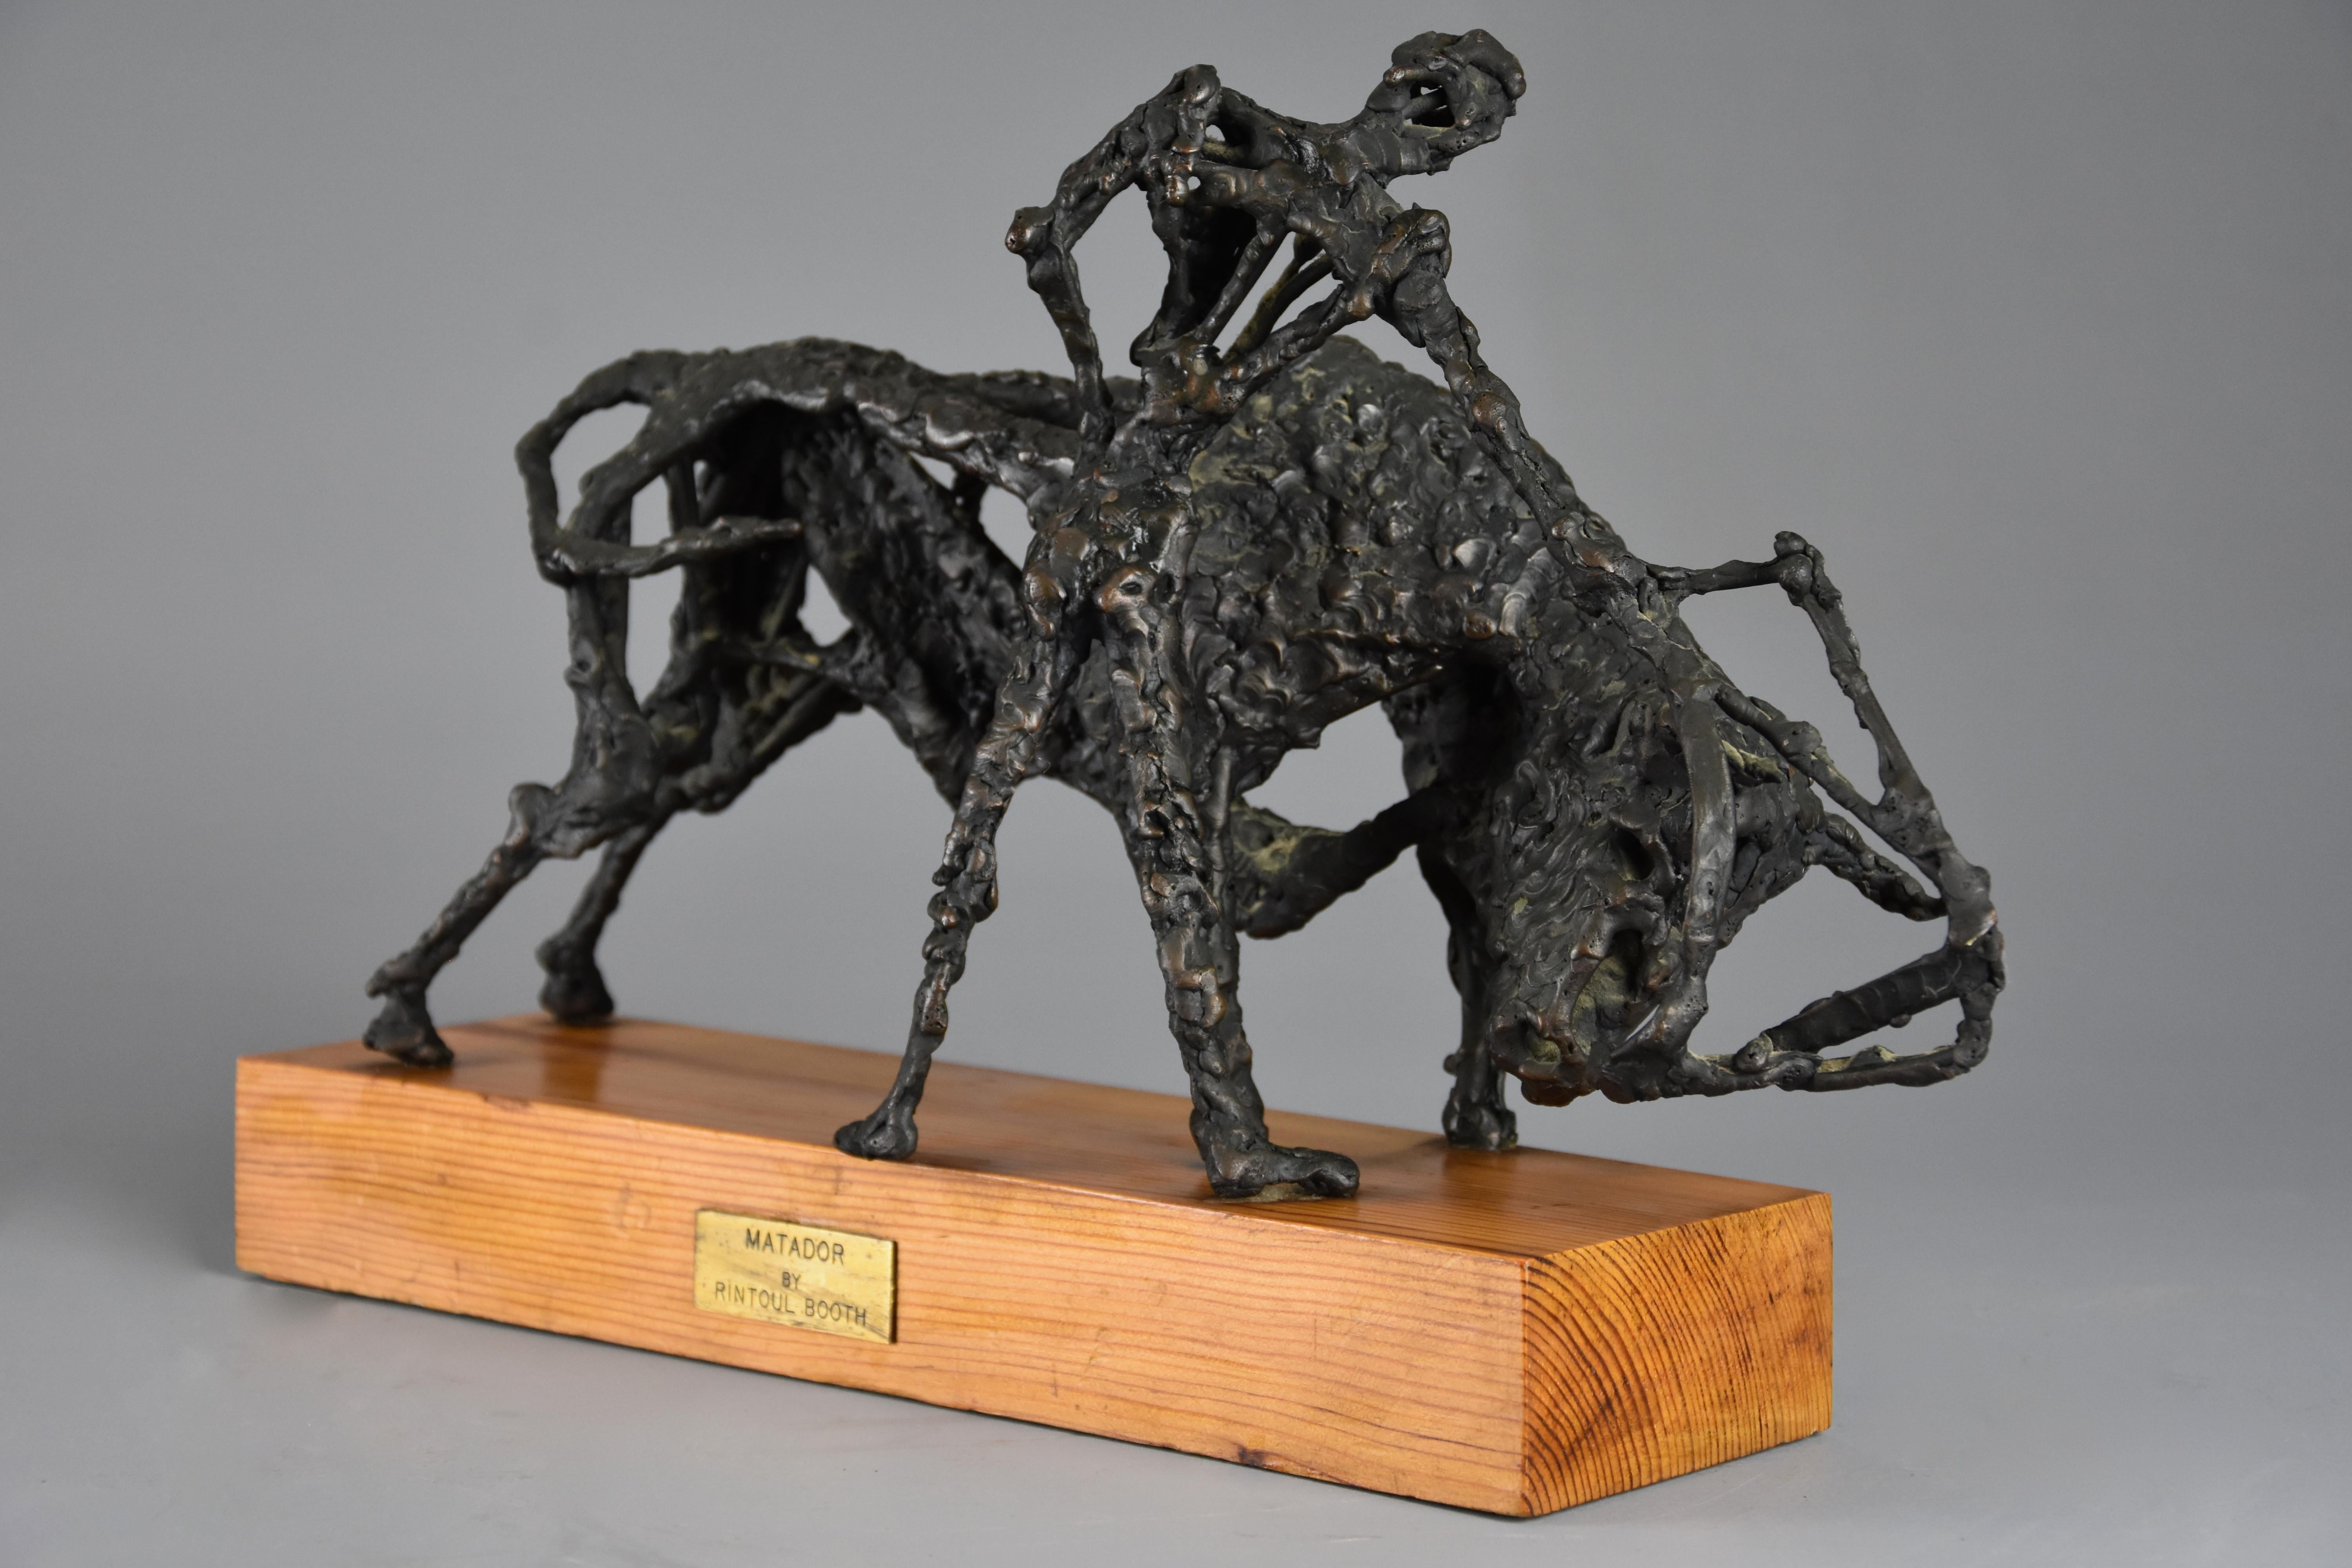 A bronze sculpture 'The Matador' by Daniel Rintoul Booth (1932-1978).

This bronze portrays a bronze Matador (or bullfighter) holding his cape near to the bull, supported on pine wooden base with brass plaque.

The sculptor, Daniel Rintoul Booth